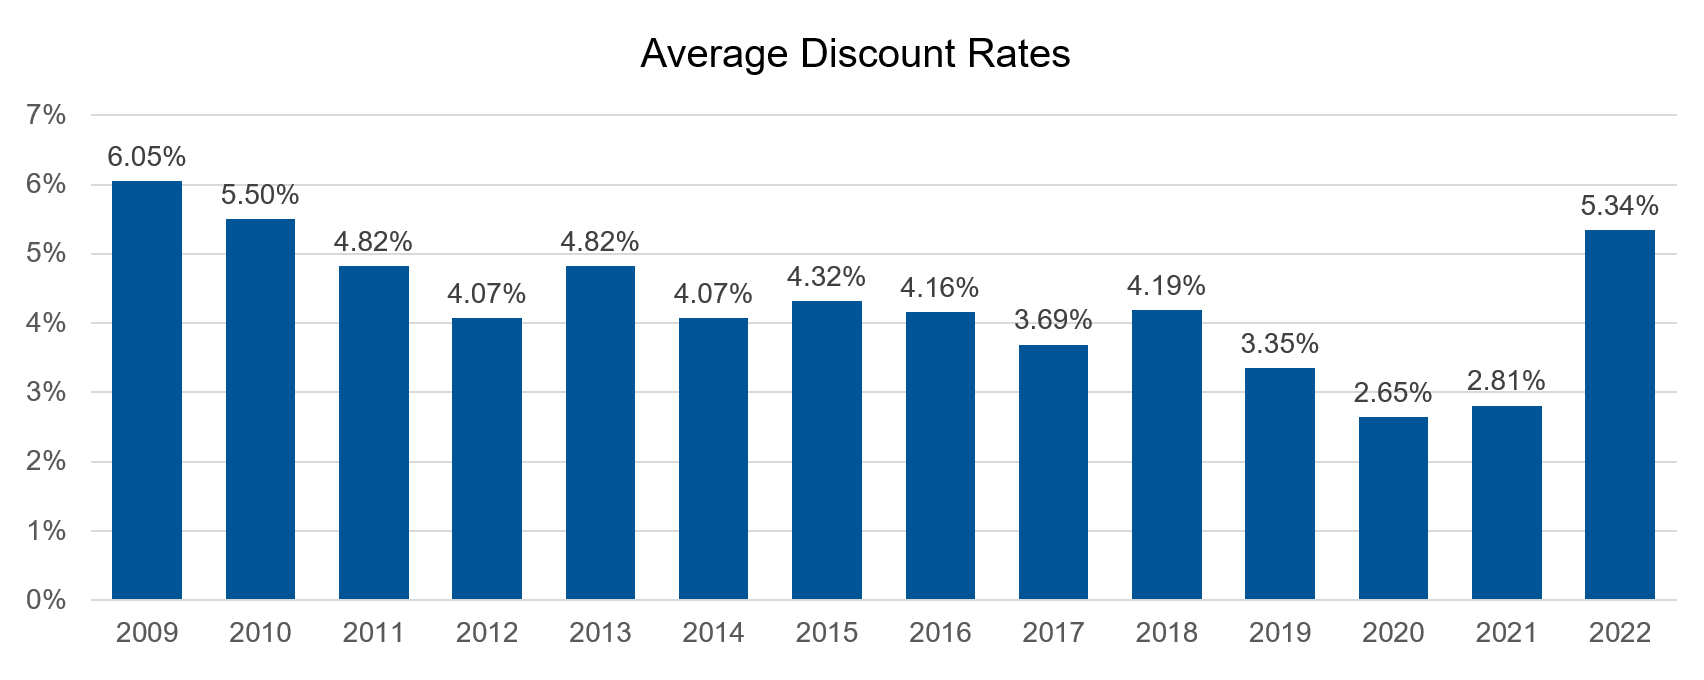 Bar chart of average discount rates from 2009 to 2022